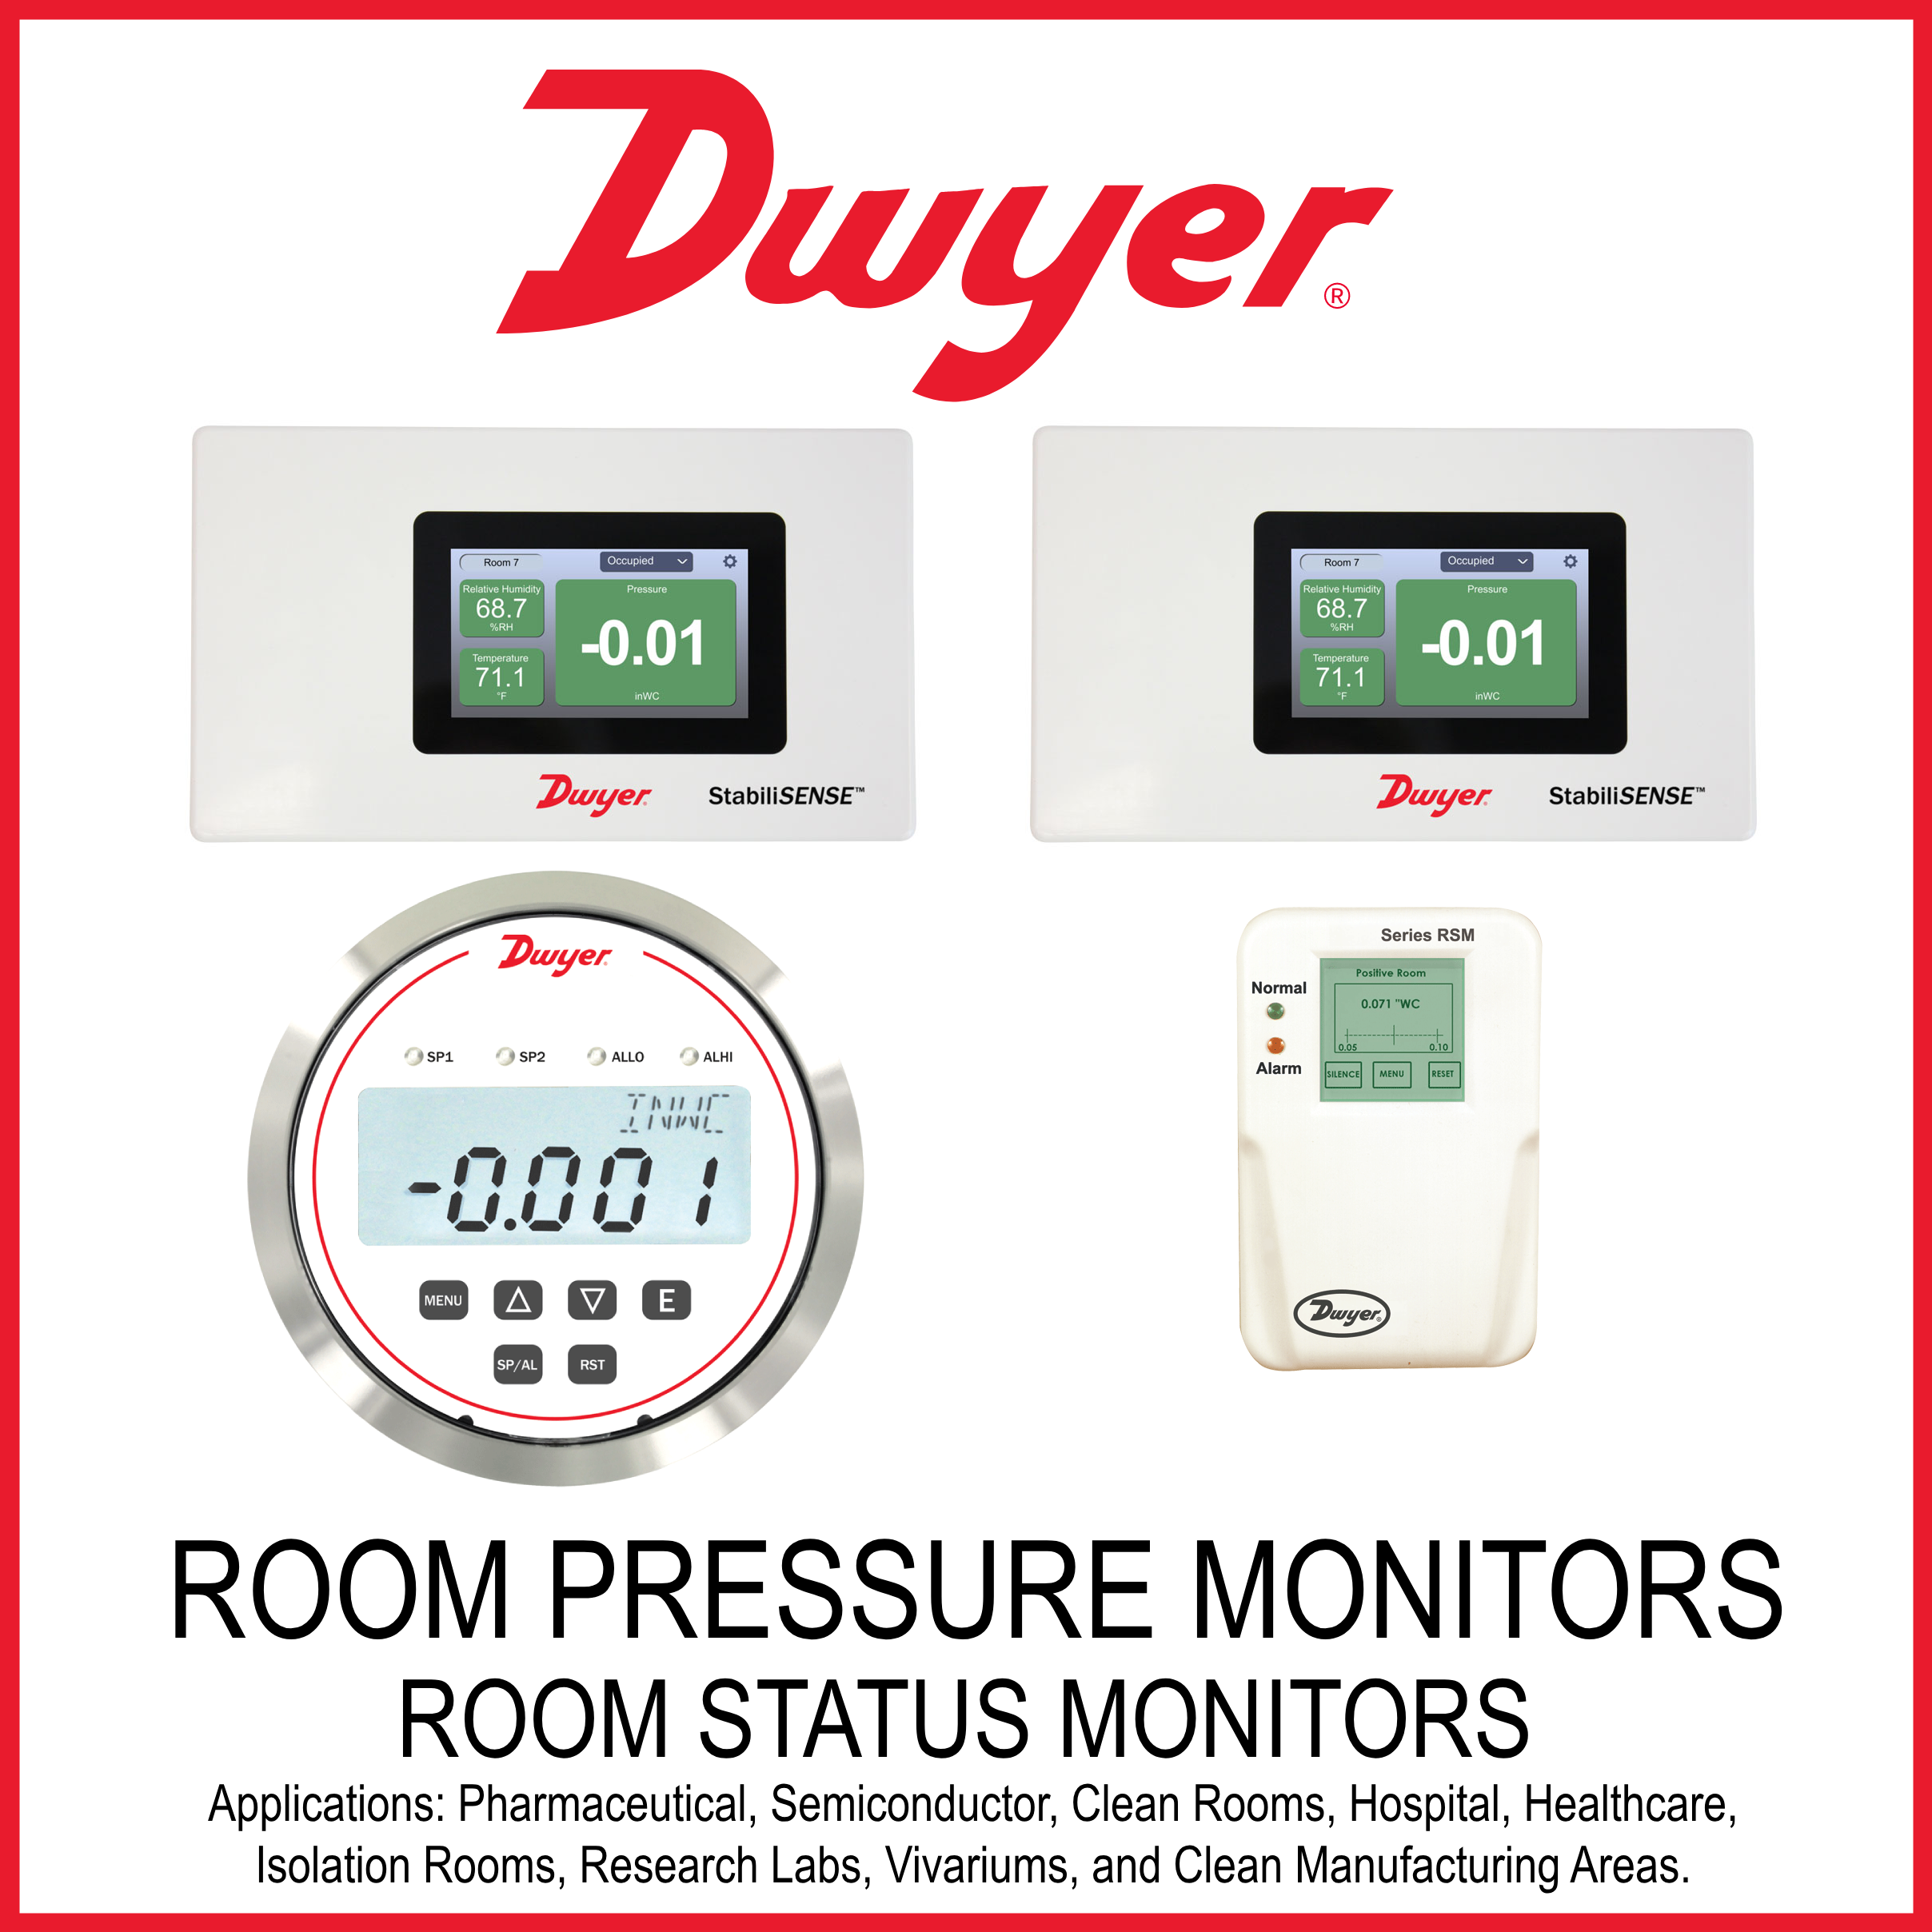 DWYER Room and Pressure Monitors